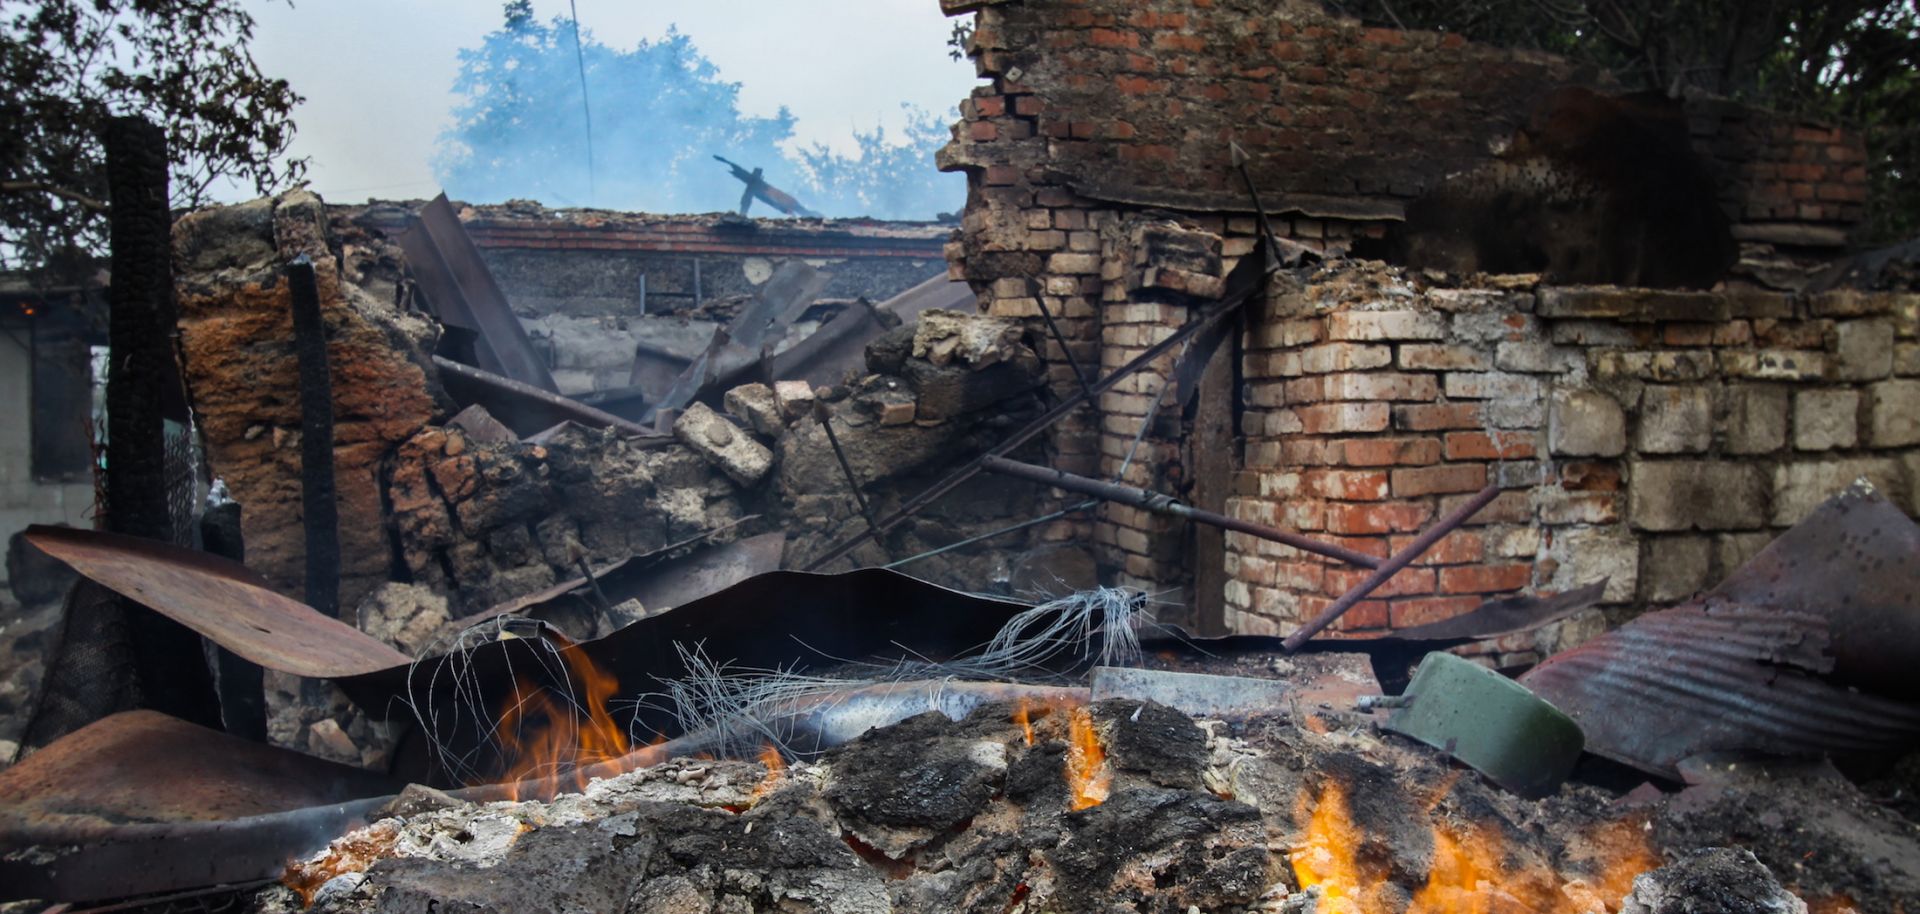 A house in the village of Roza in eastern Ukraine is left burning after fighting between Ukrainian forces and Russian separatists on Sept. 6, 2019.